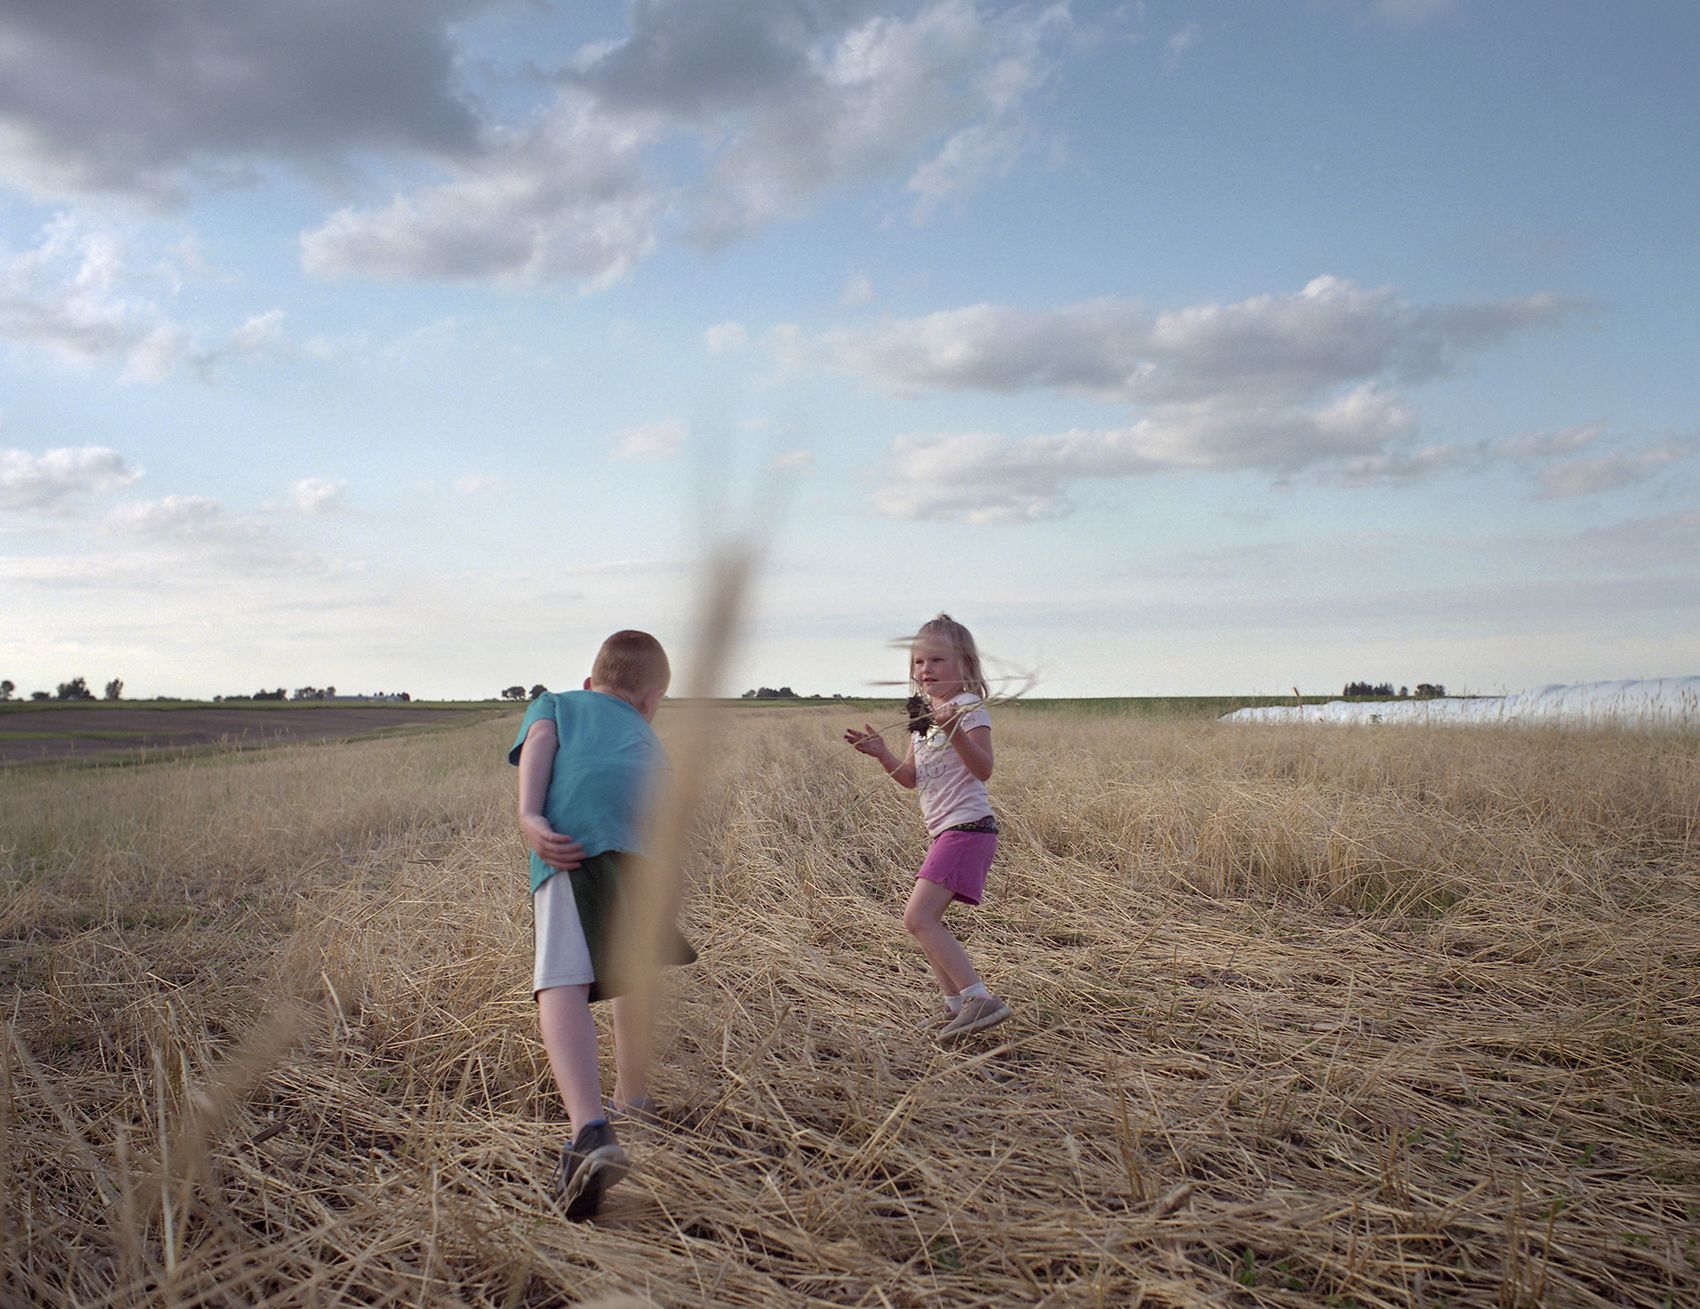 Children play in Tim Sieren’s cover crops while the Practical Farmers of Iowa group meet about conservation implementation. Image by Spike Johnson. United States, 2019. 